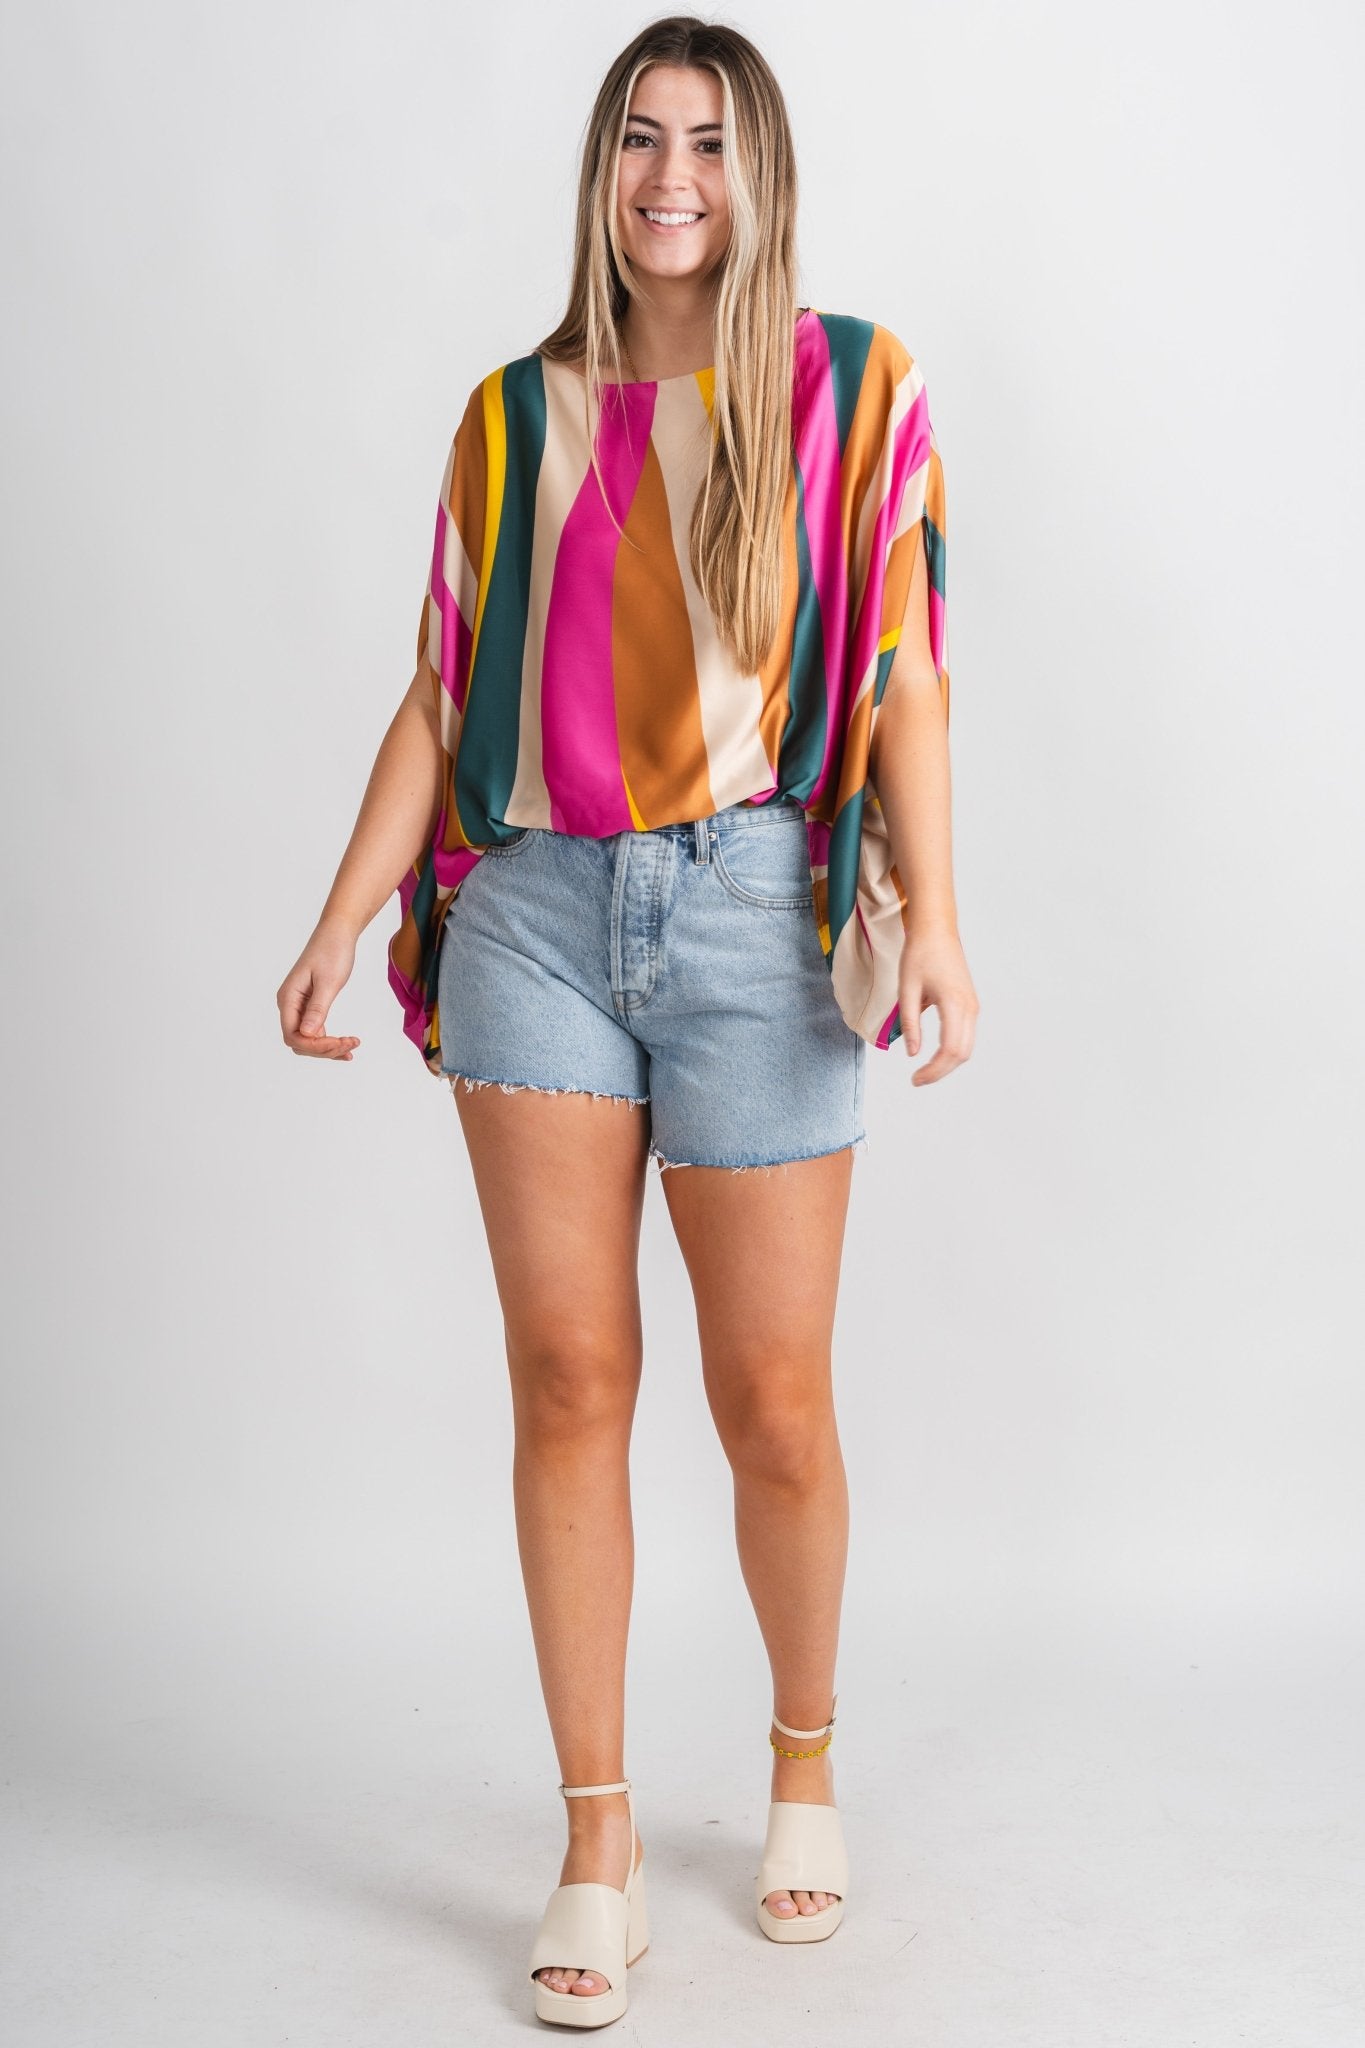 Striped sunset wonders top pink multi - Stylish Top - Trendy Staycation Outfits at Lush Fashion Lounge Boutique in Oklahoma City